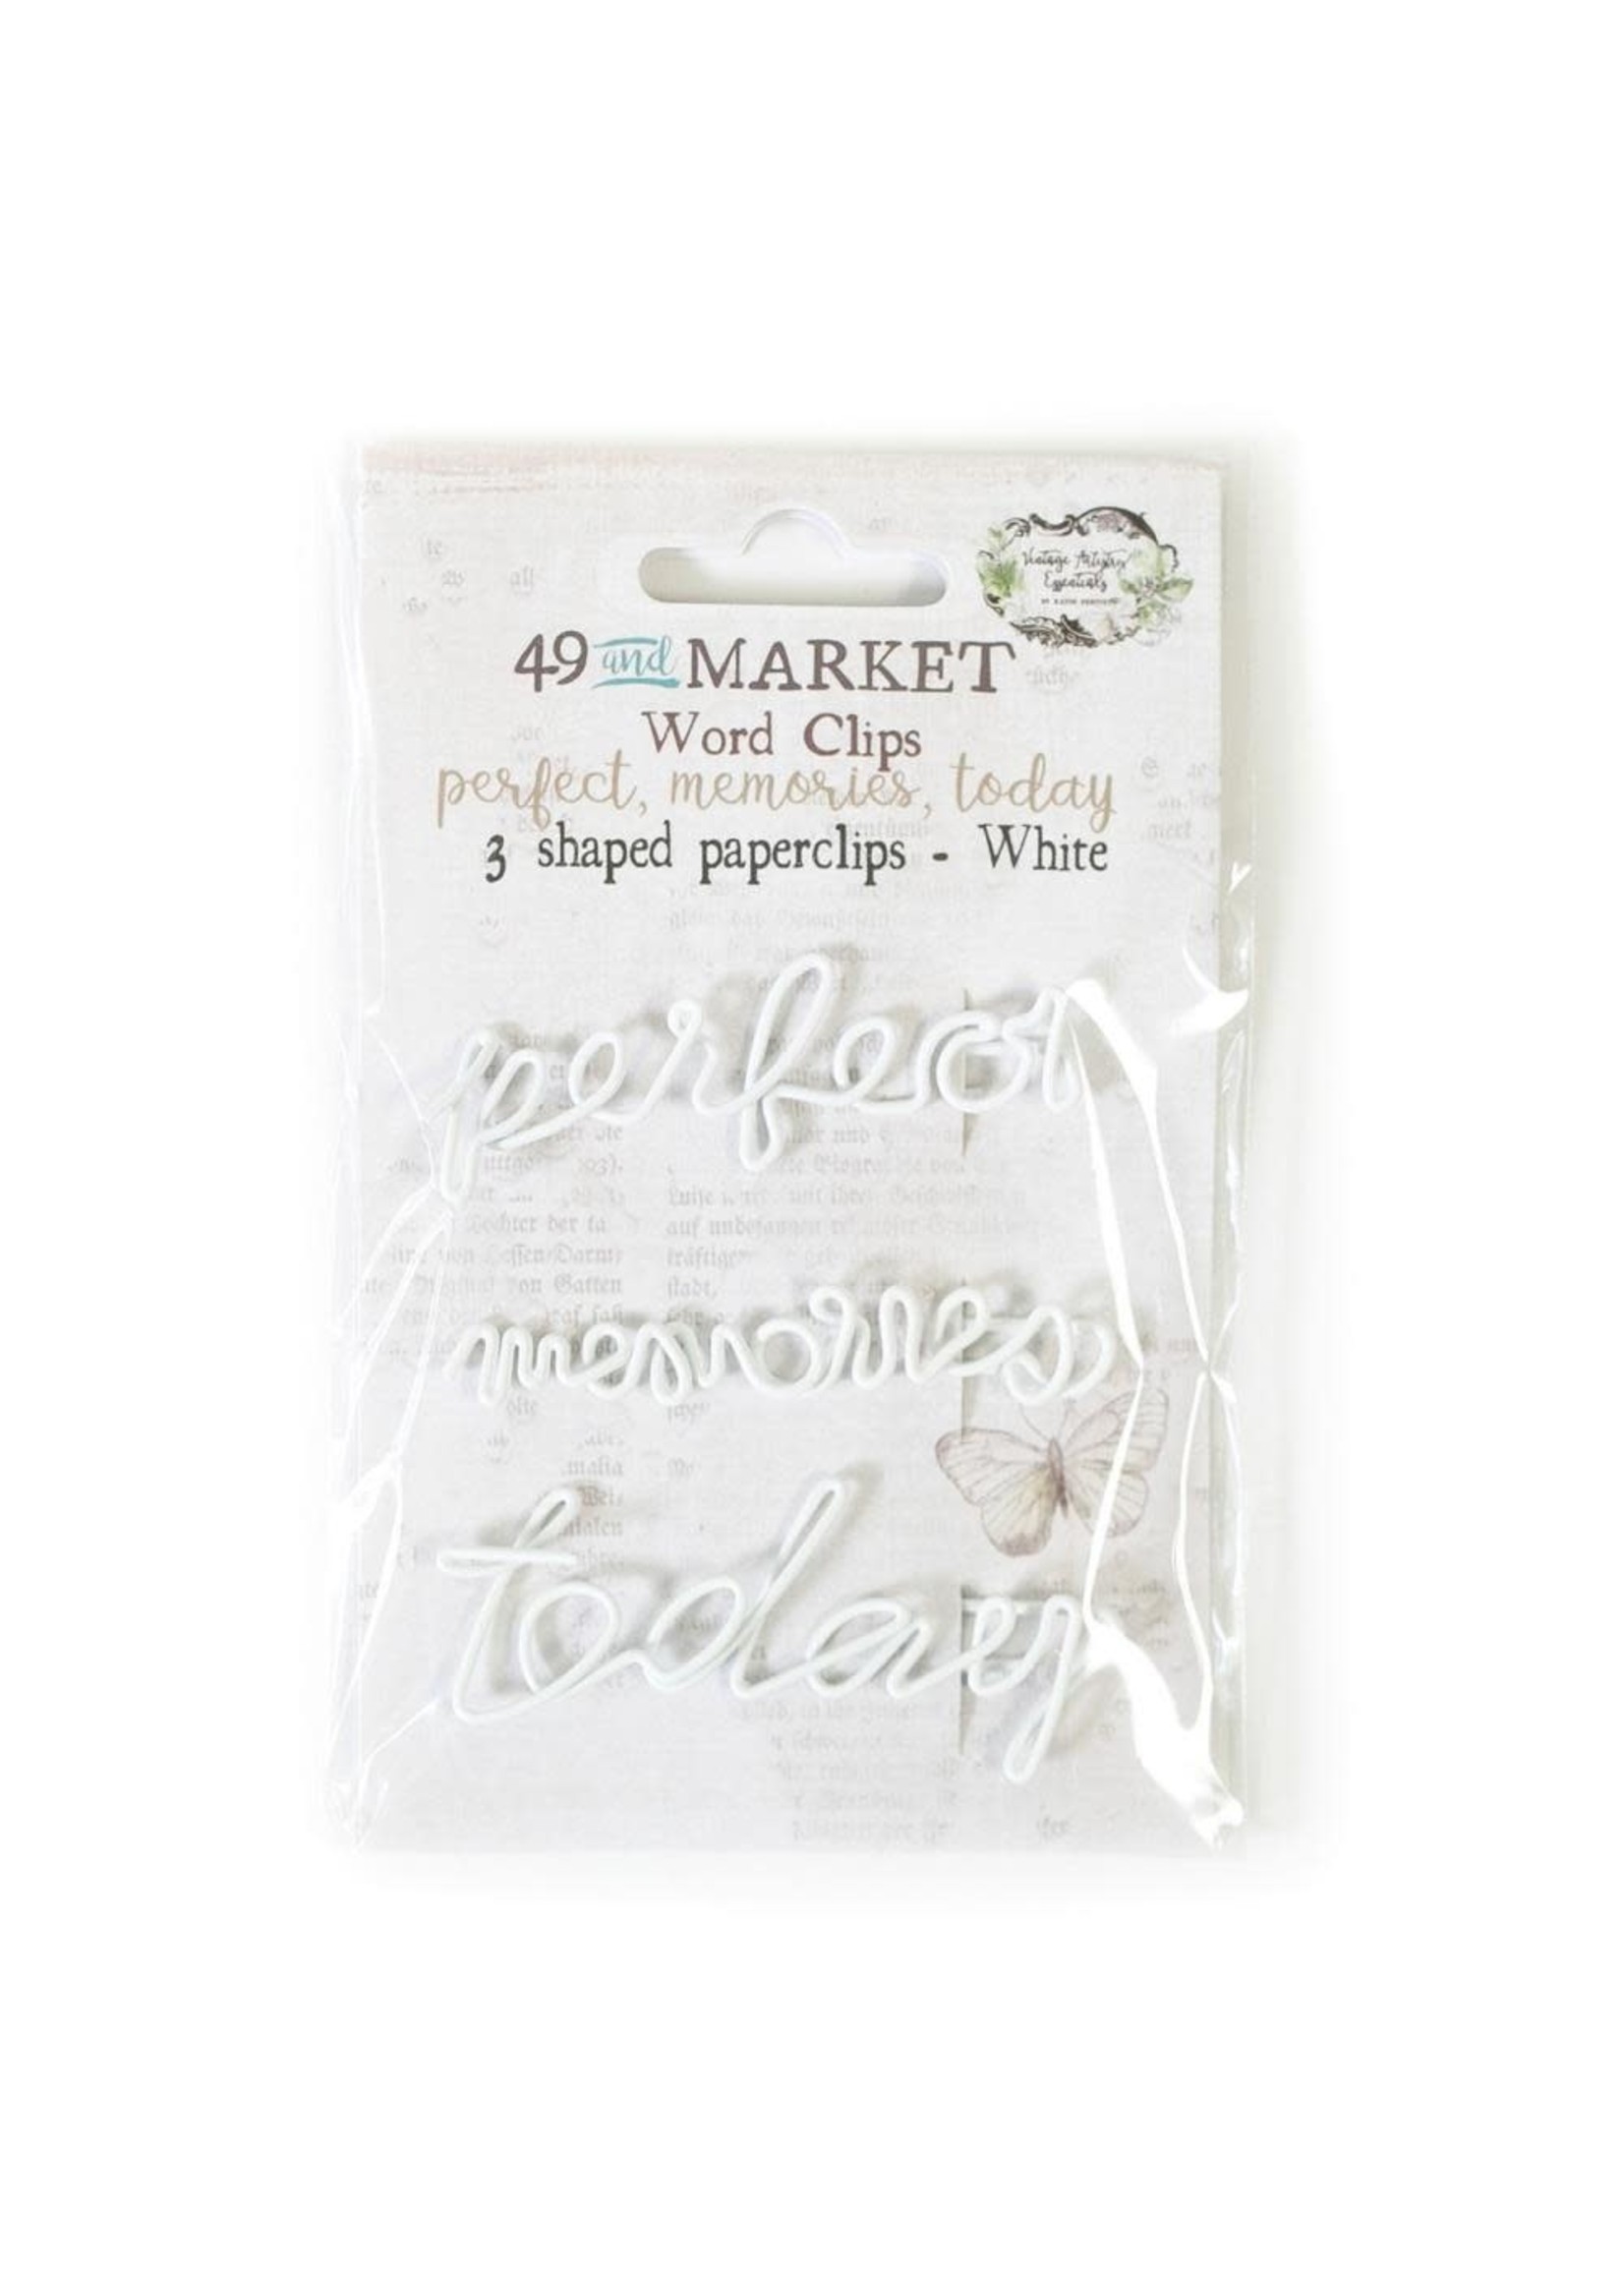 49 and Market Shaped Paperclips:  White Words